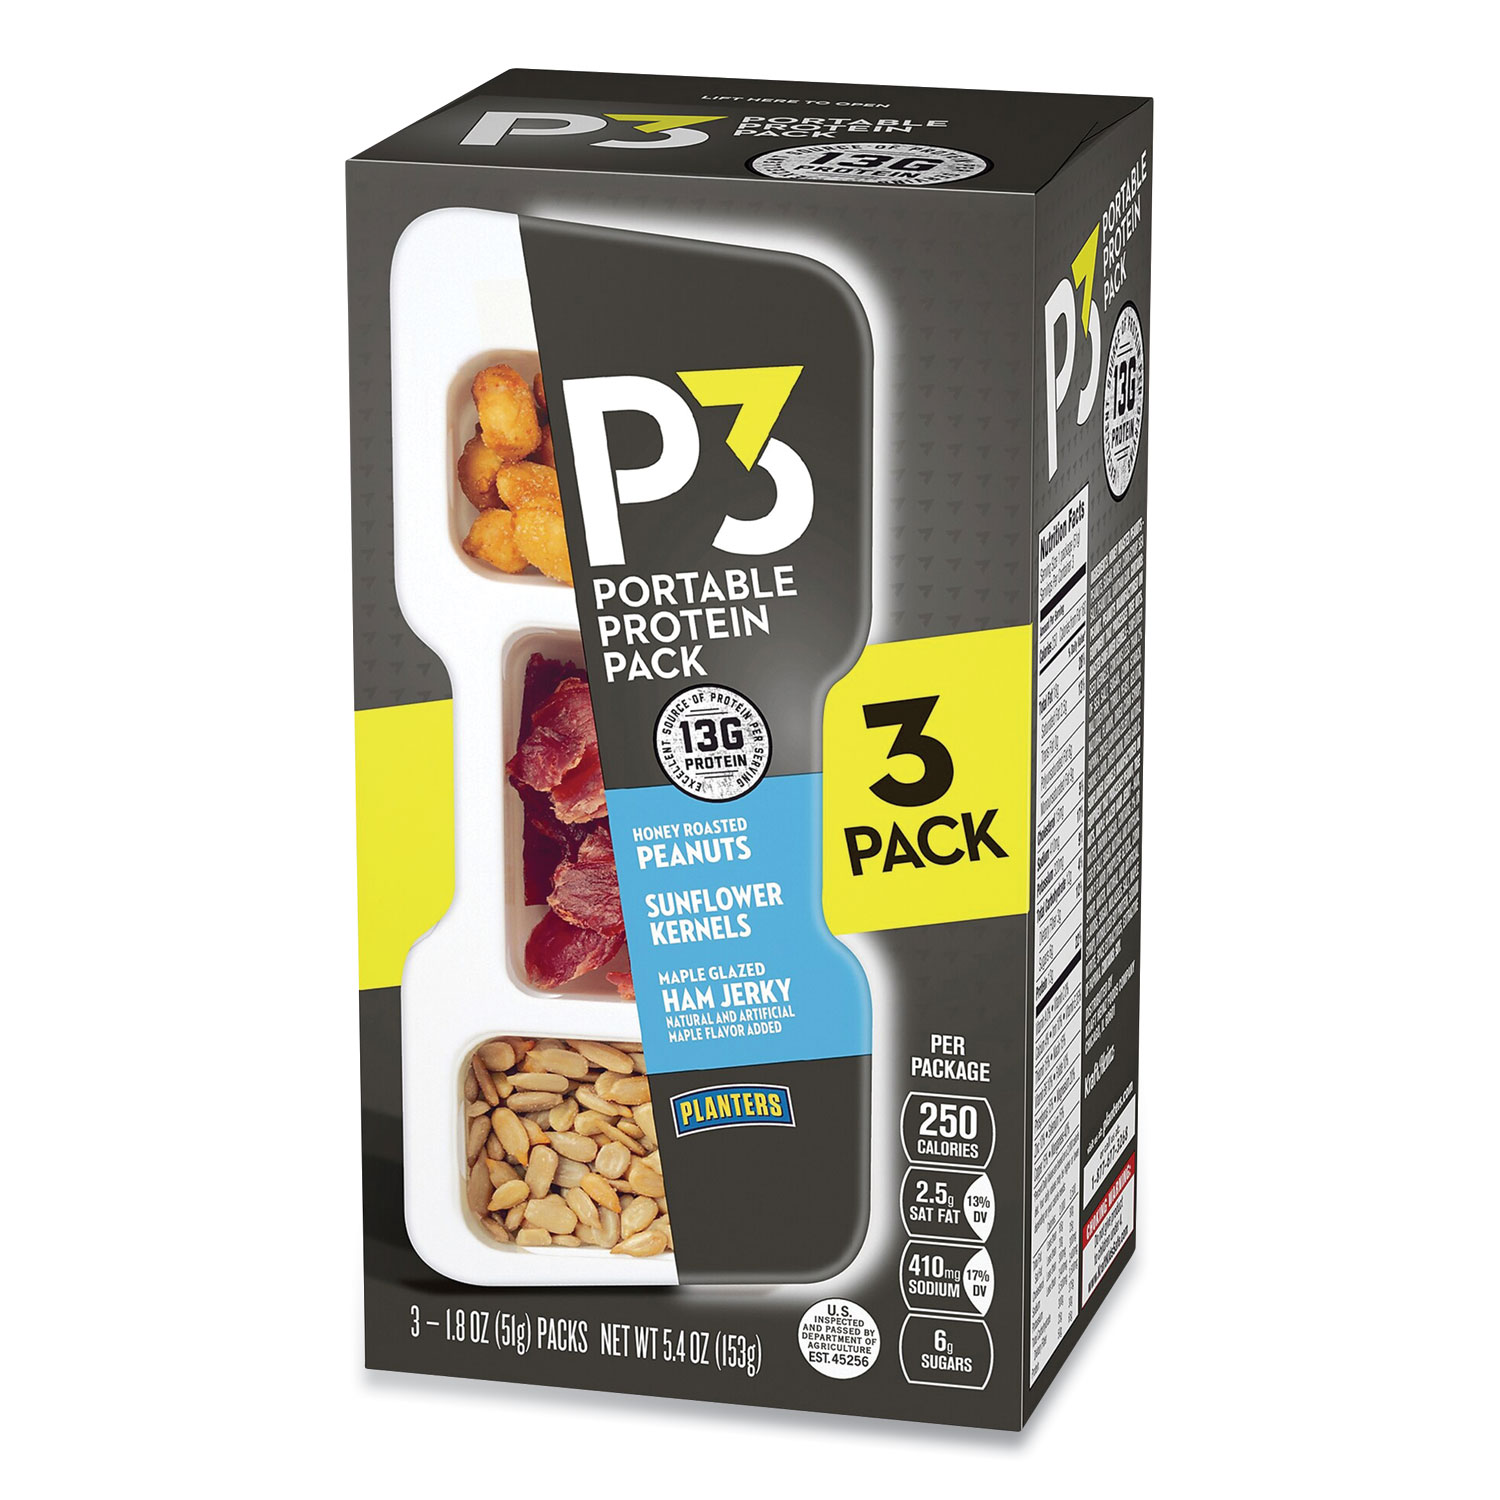 P3 Portable Protein Pack with Planters Peanuts, Honey Roasted Peanuts/Maple Ham Jerky/Sunflower Kernels, 3/Pack